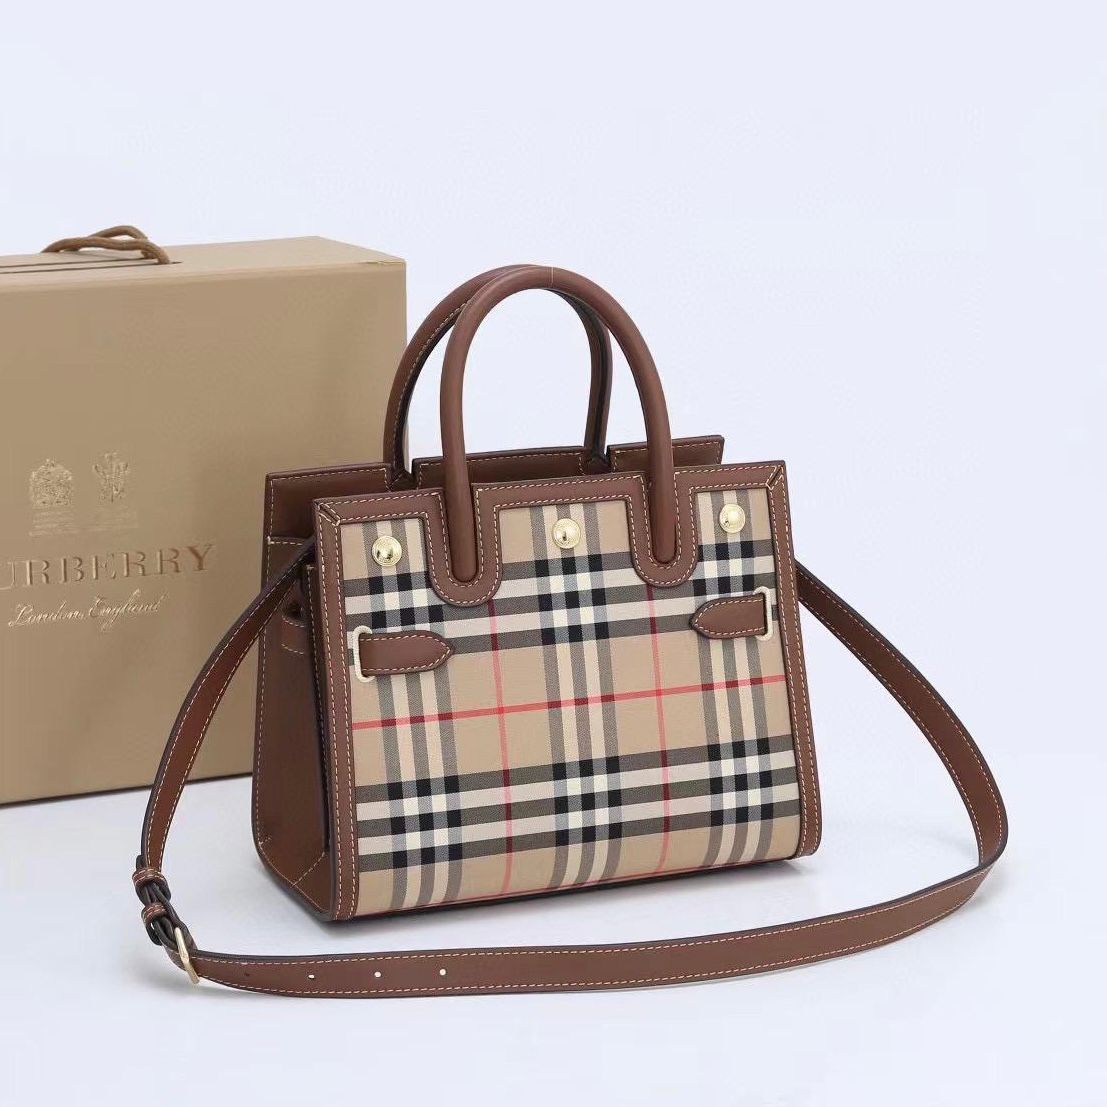 Burberry Mini Tote Leather and Vintage Check Bag